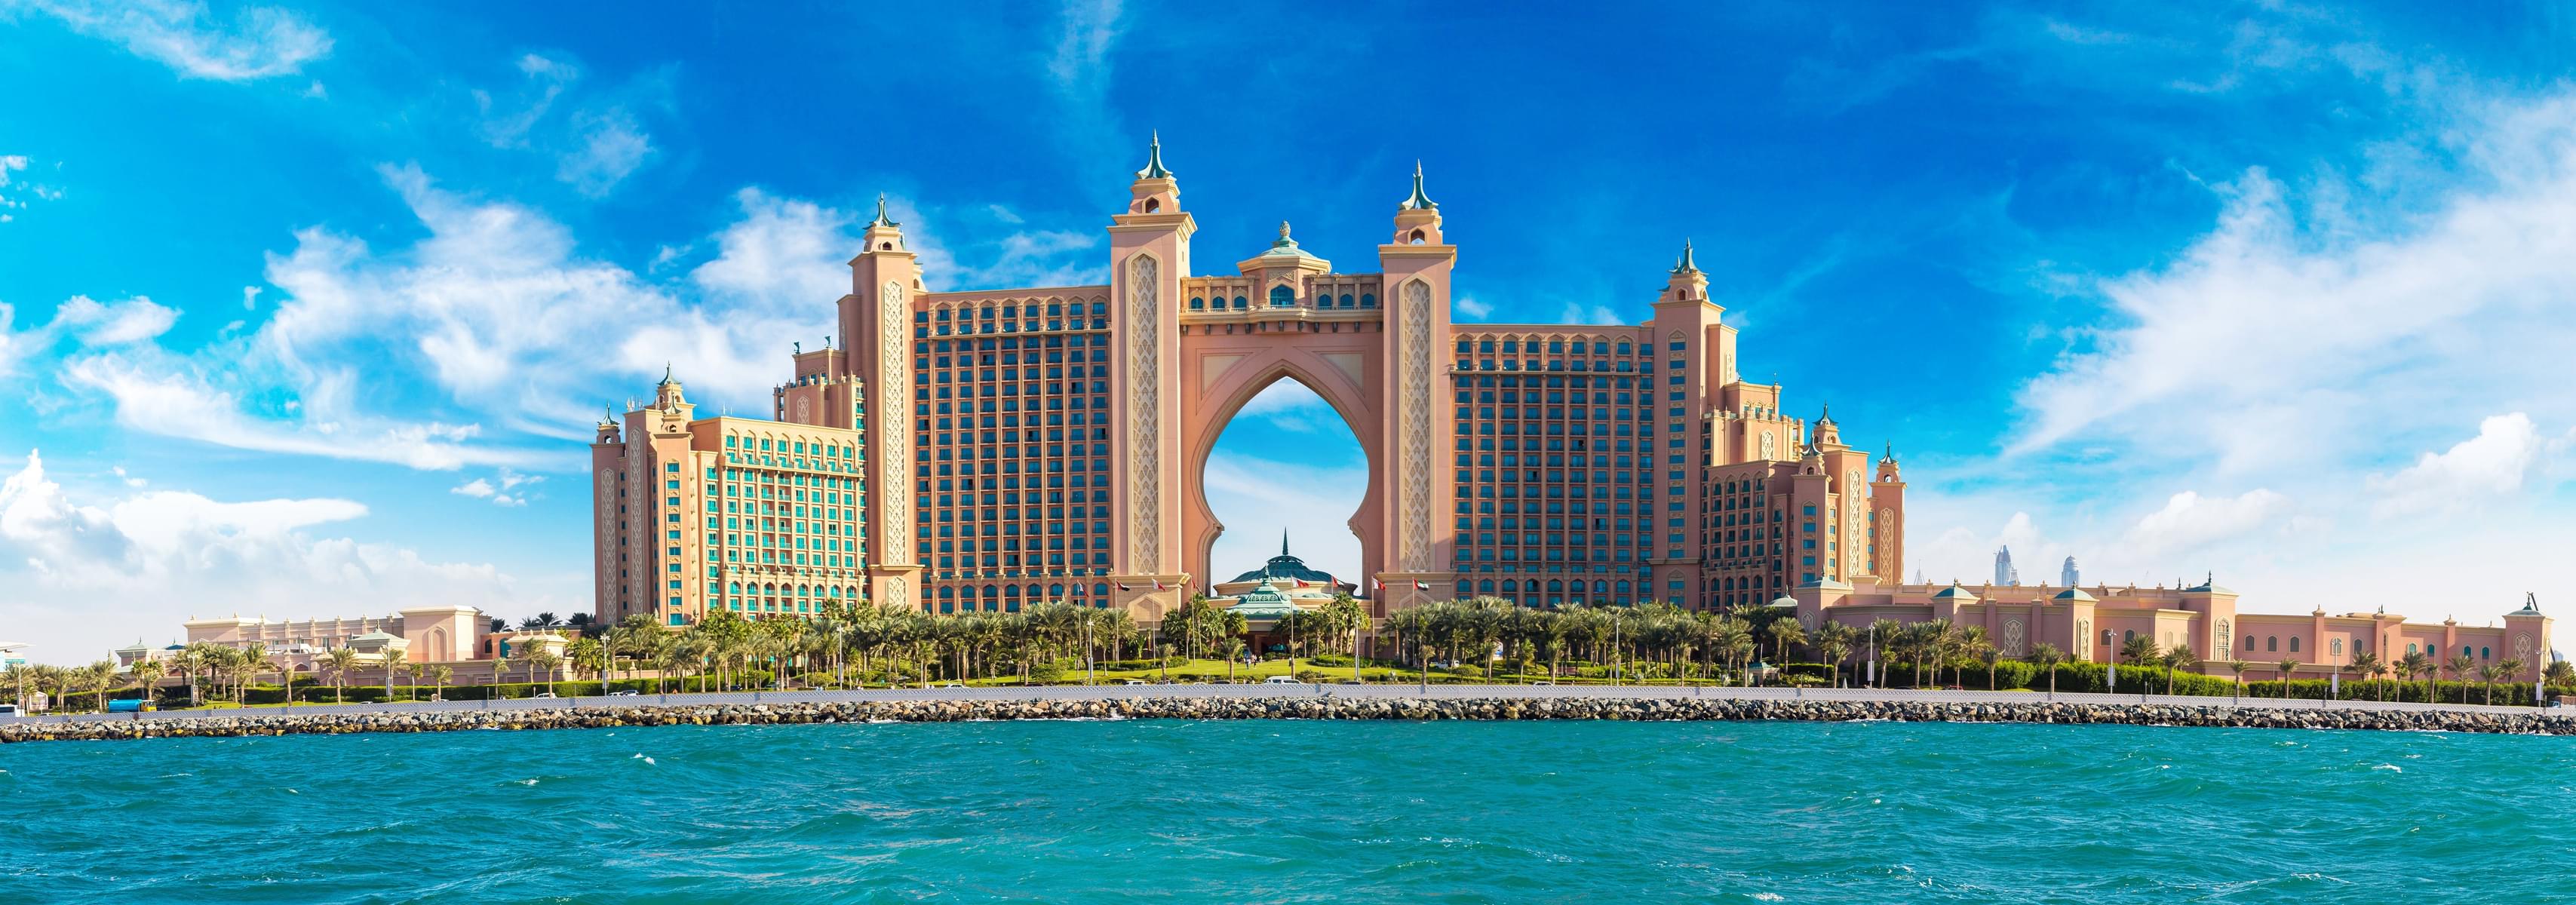 Don't forget to capture the spectacular Atlantis The Palm.